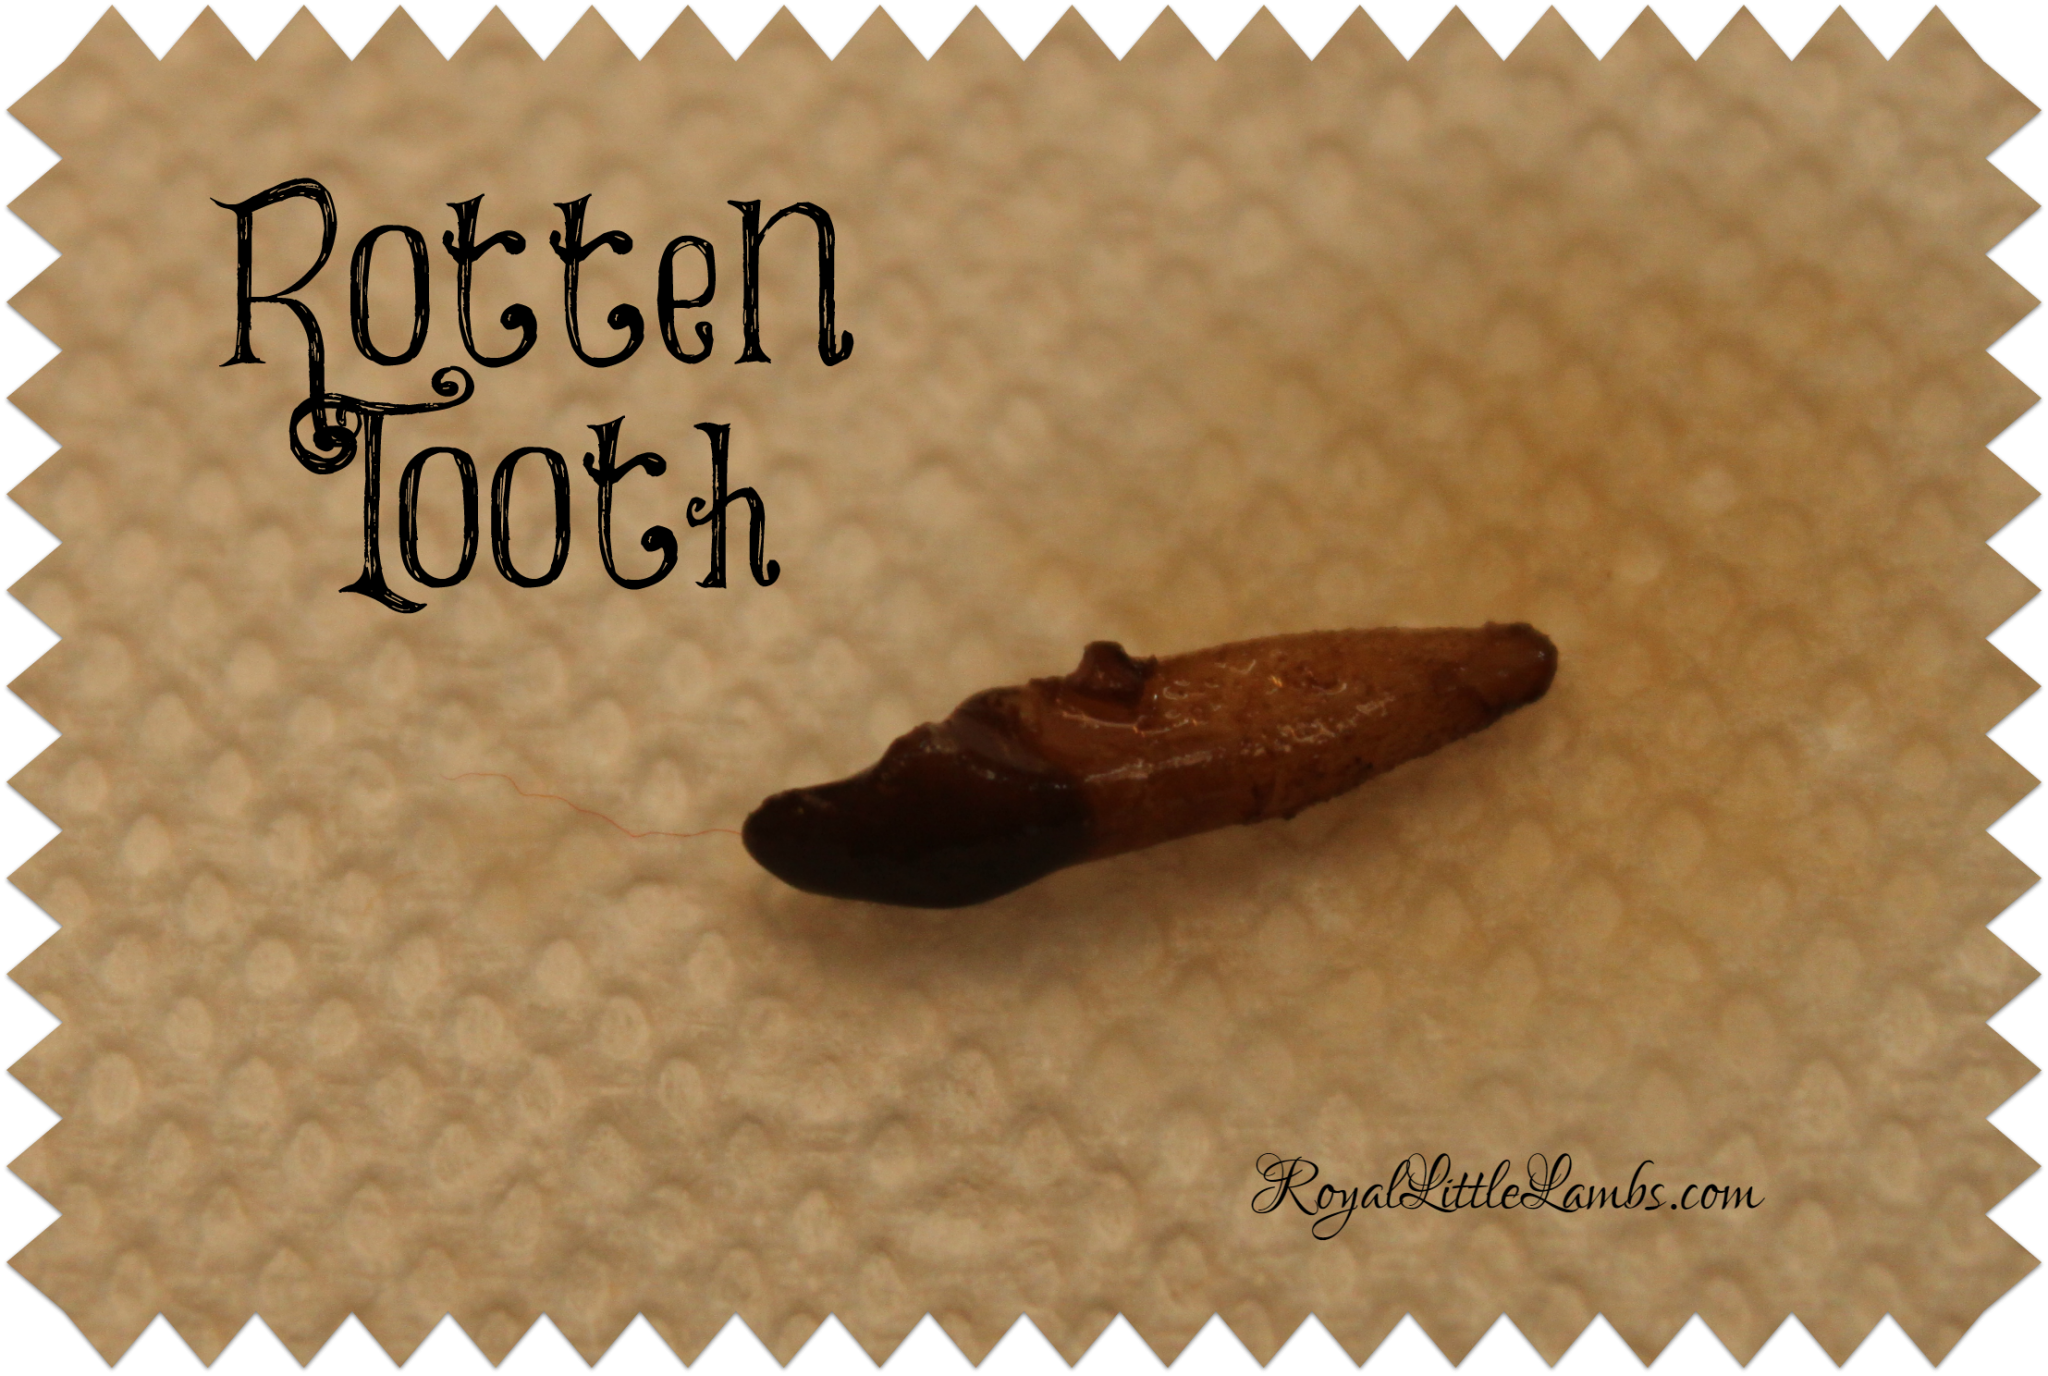 Rotten Tooth